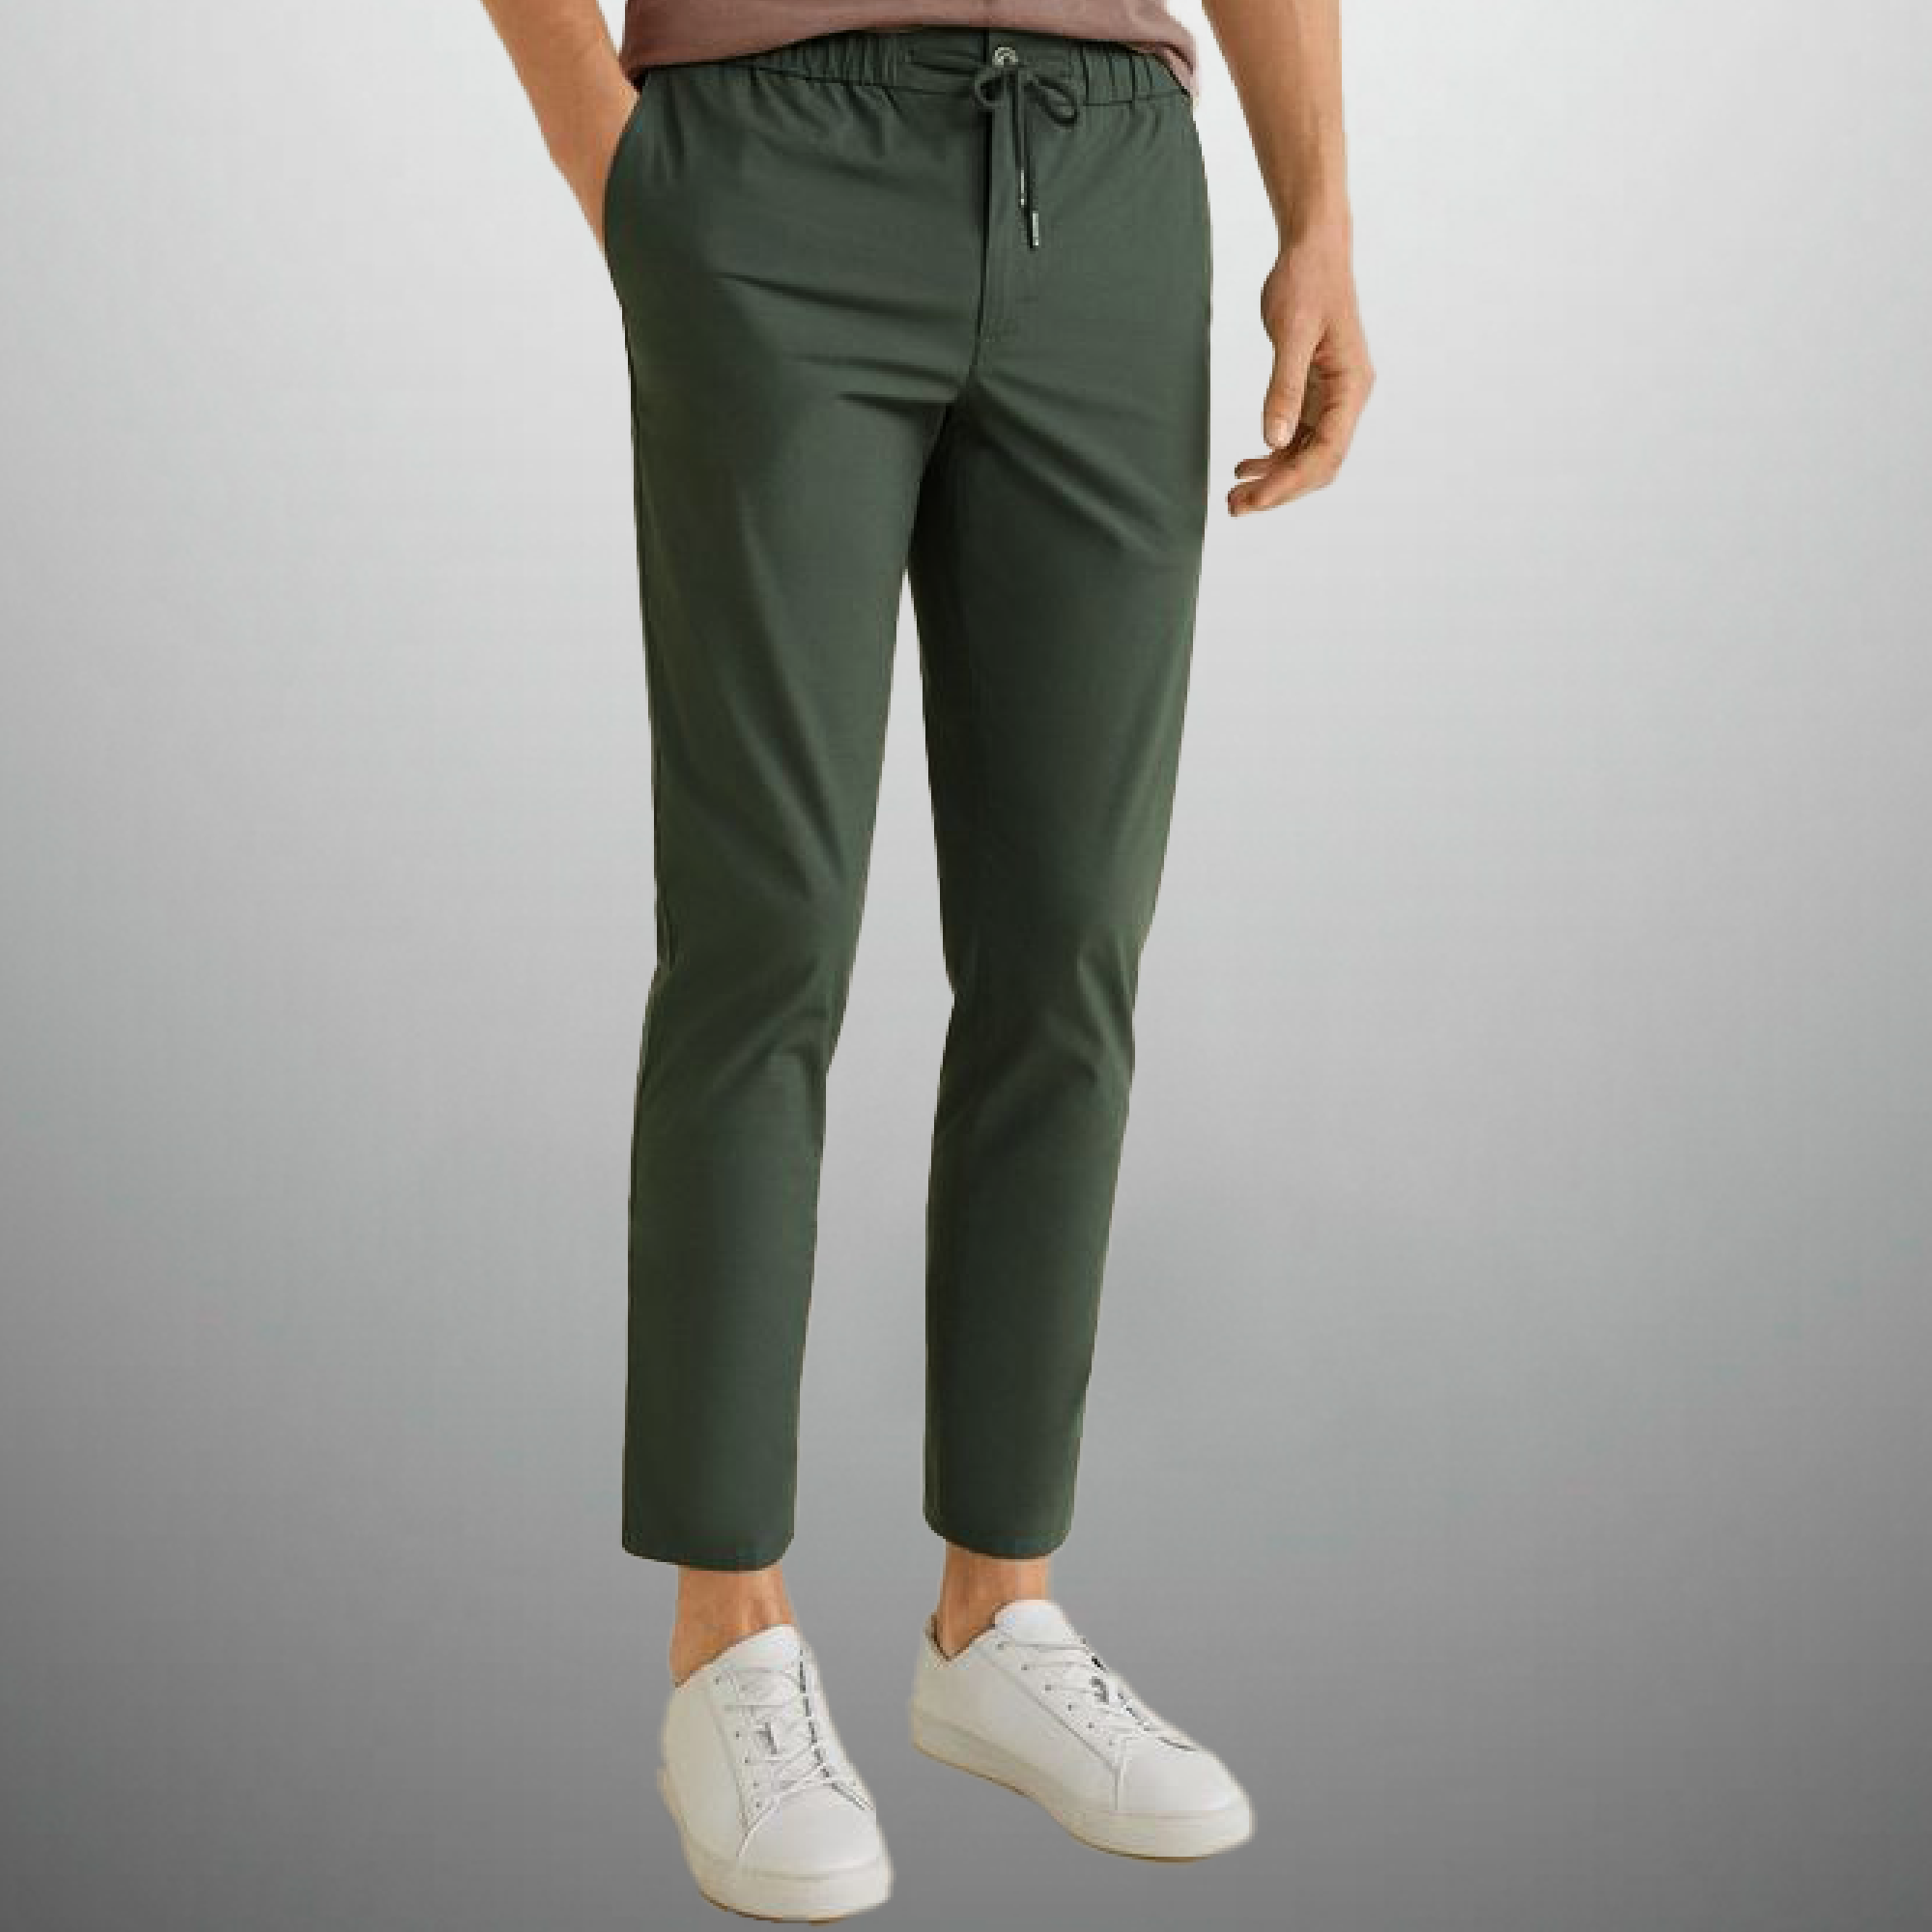 Men's Sage Green style Casual pant-RMT012